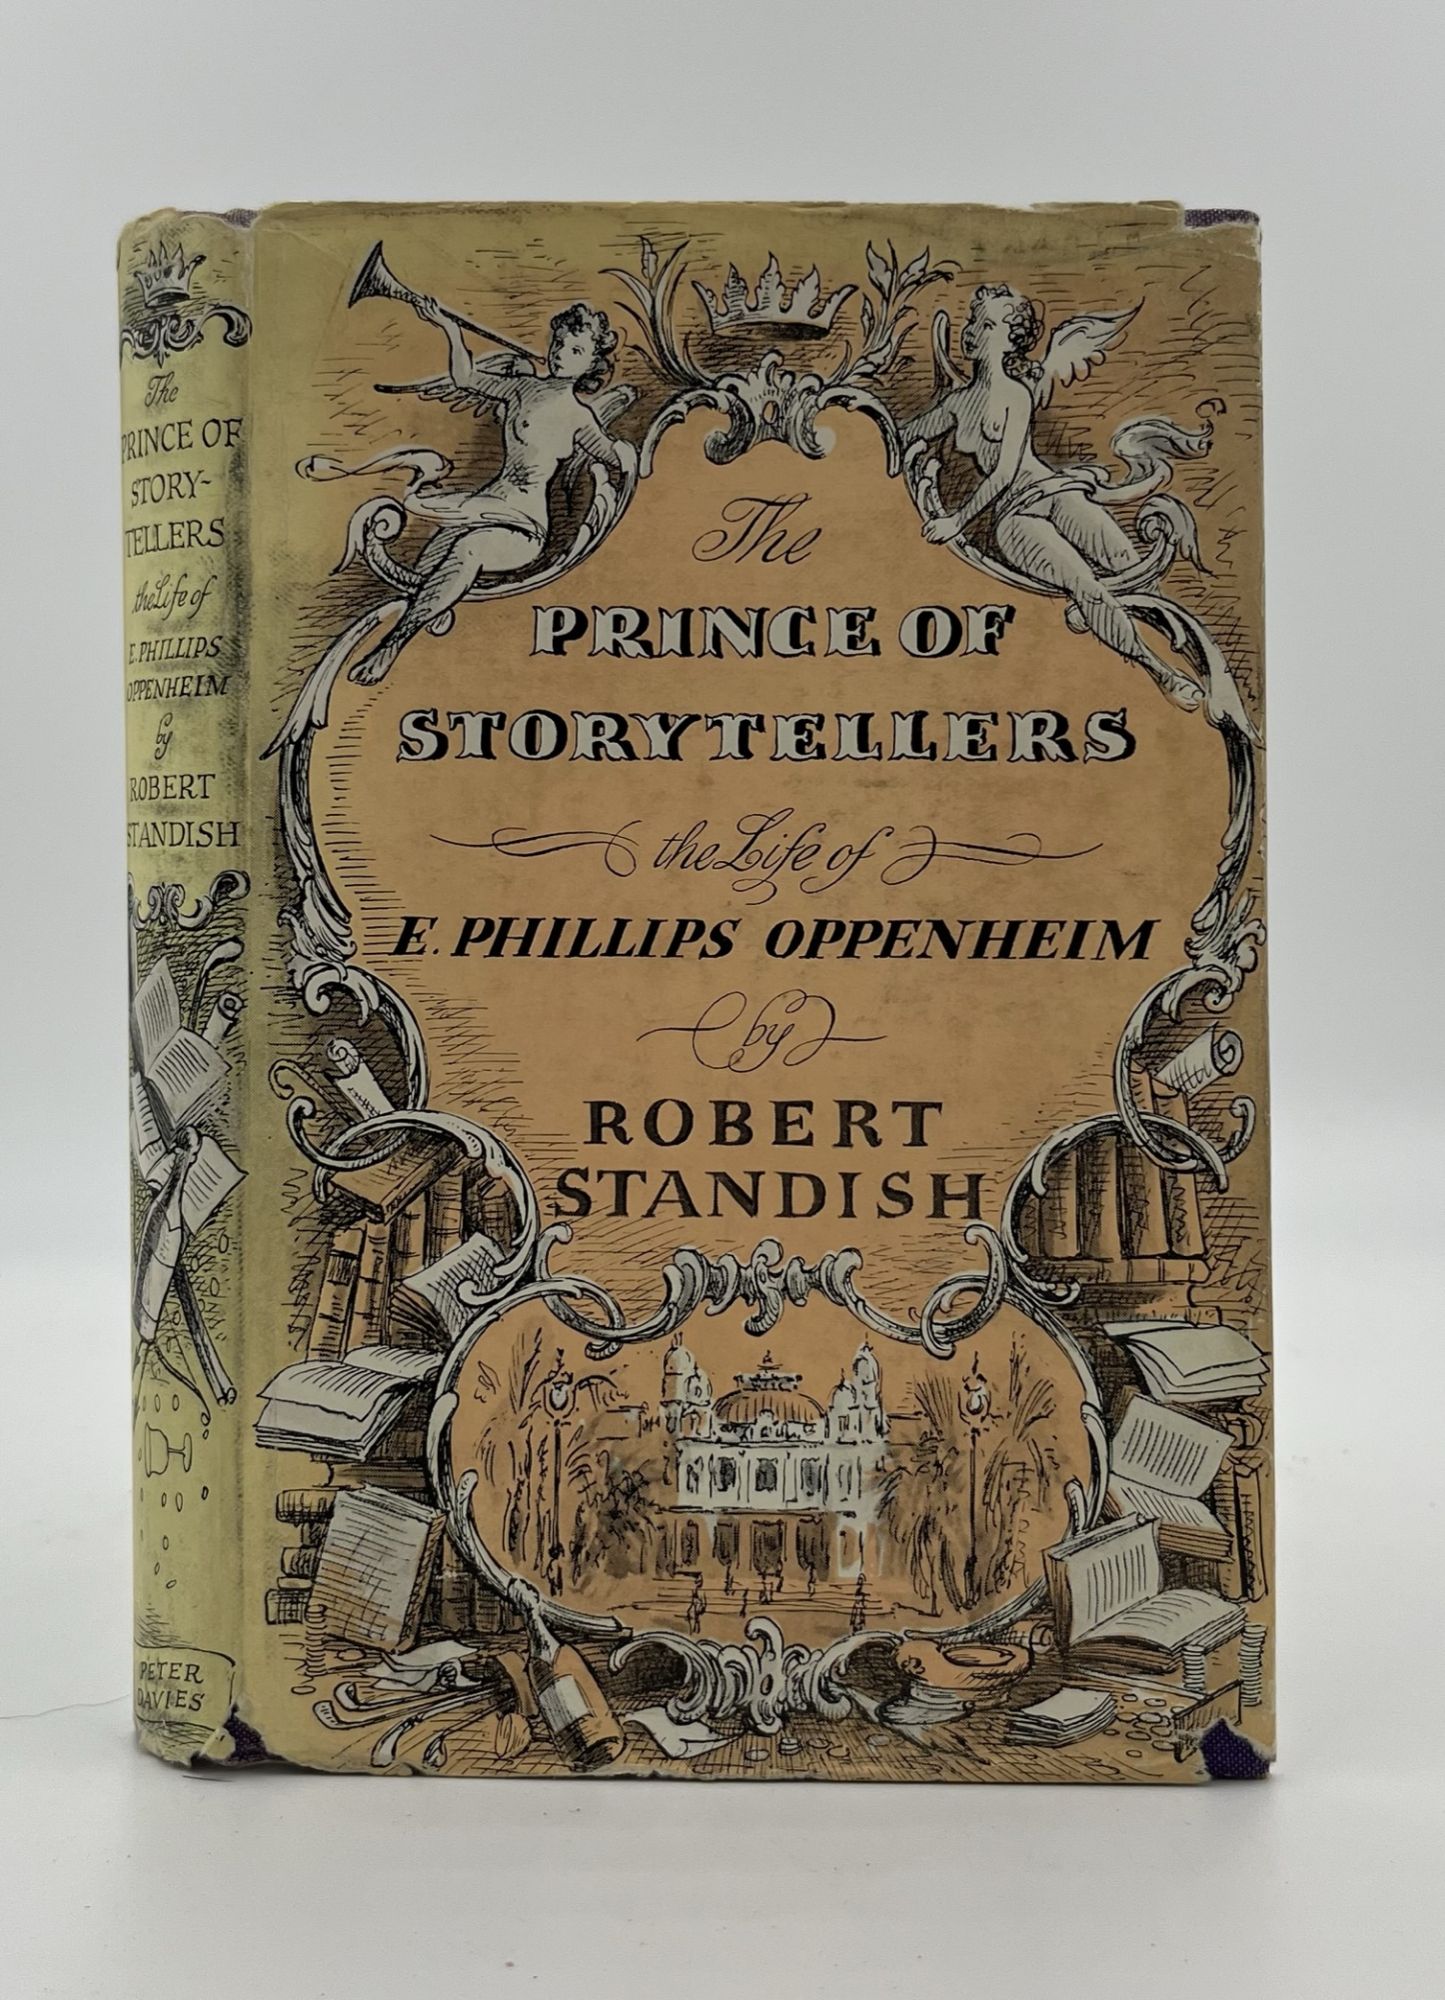 Book #160493 The Prince of Storytellers, the Life of E. Phillips Oppenheim. Robert Standish.